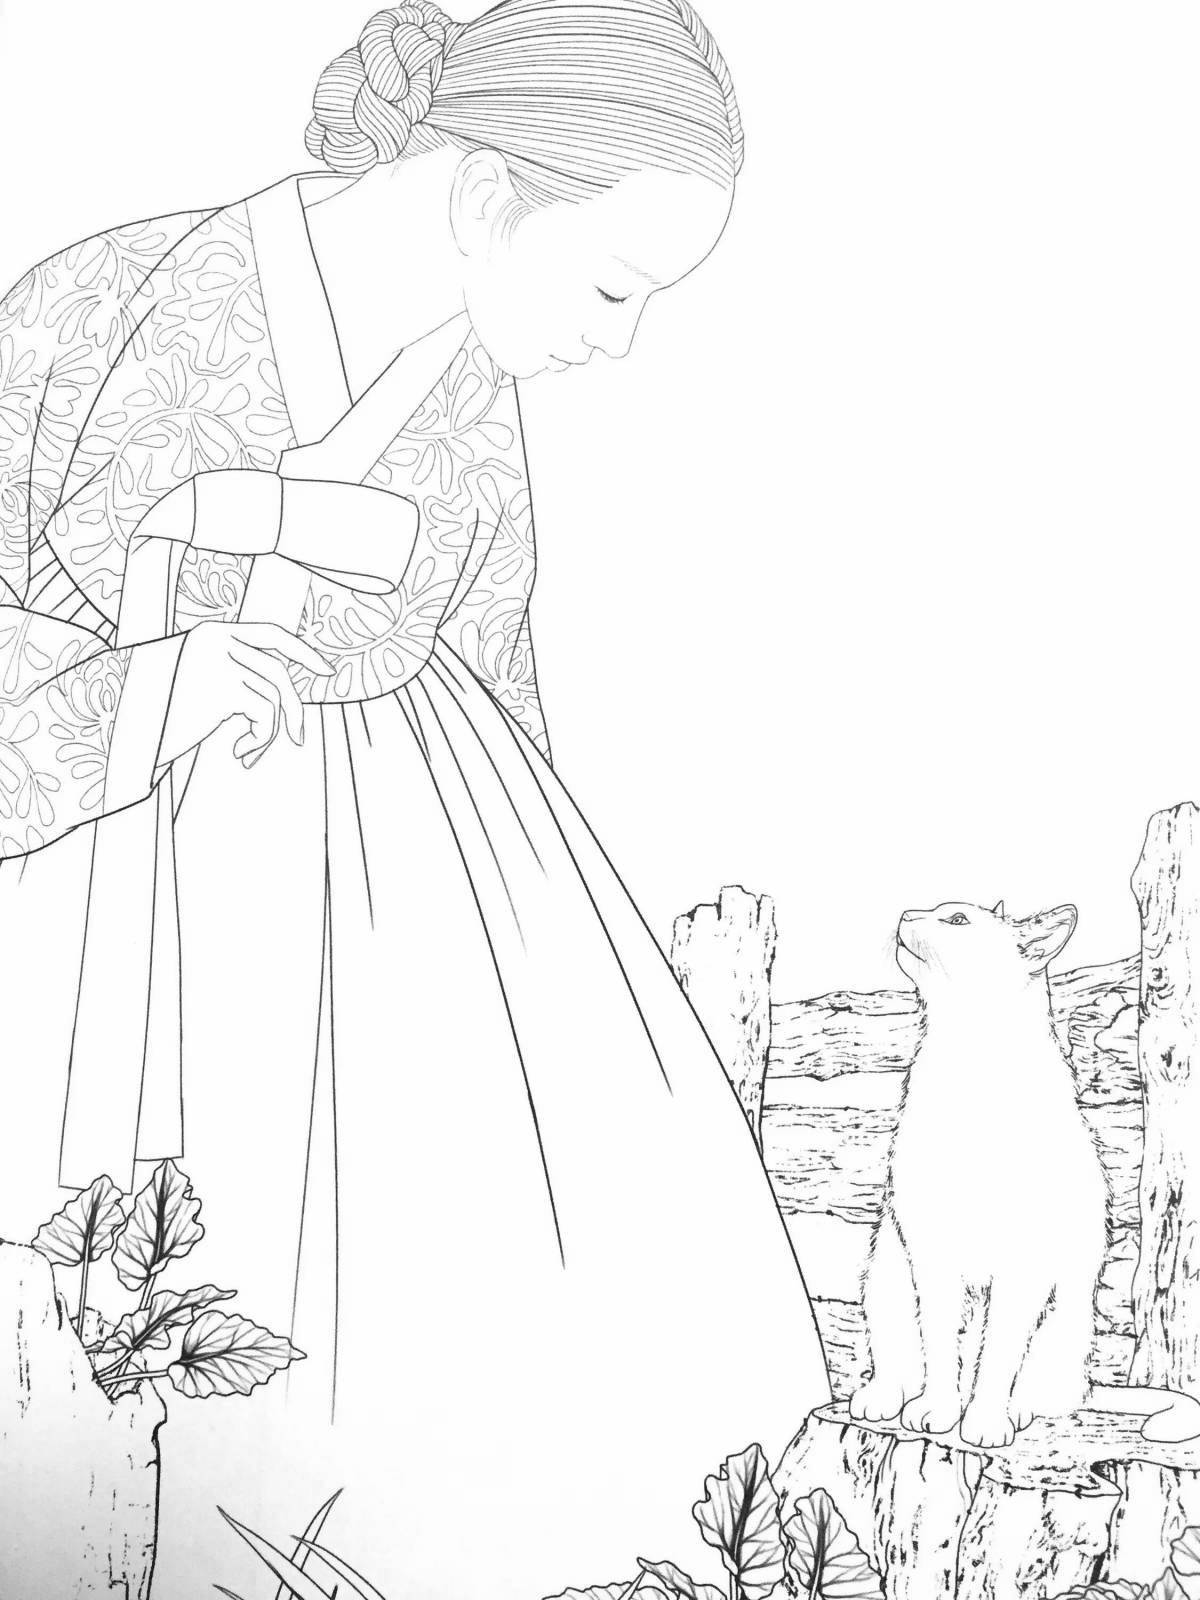 Colorful hanbok coloring page